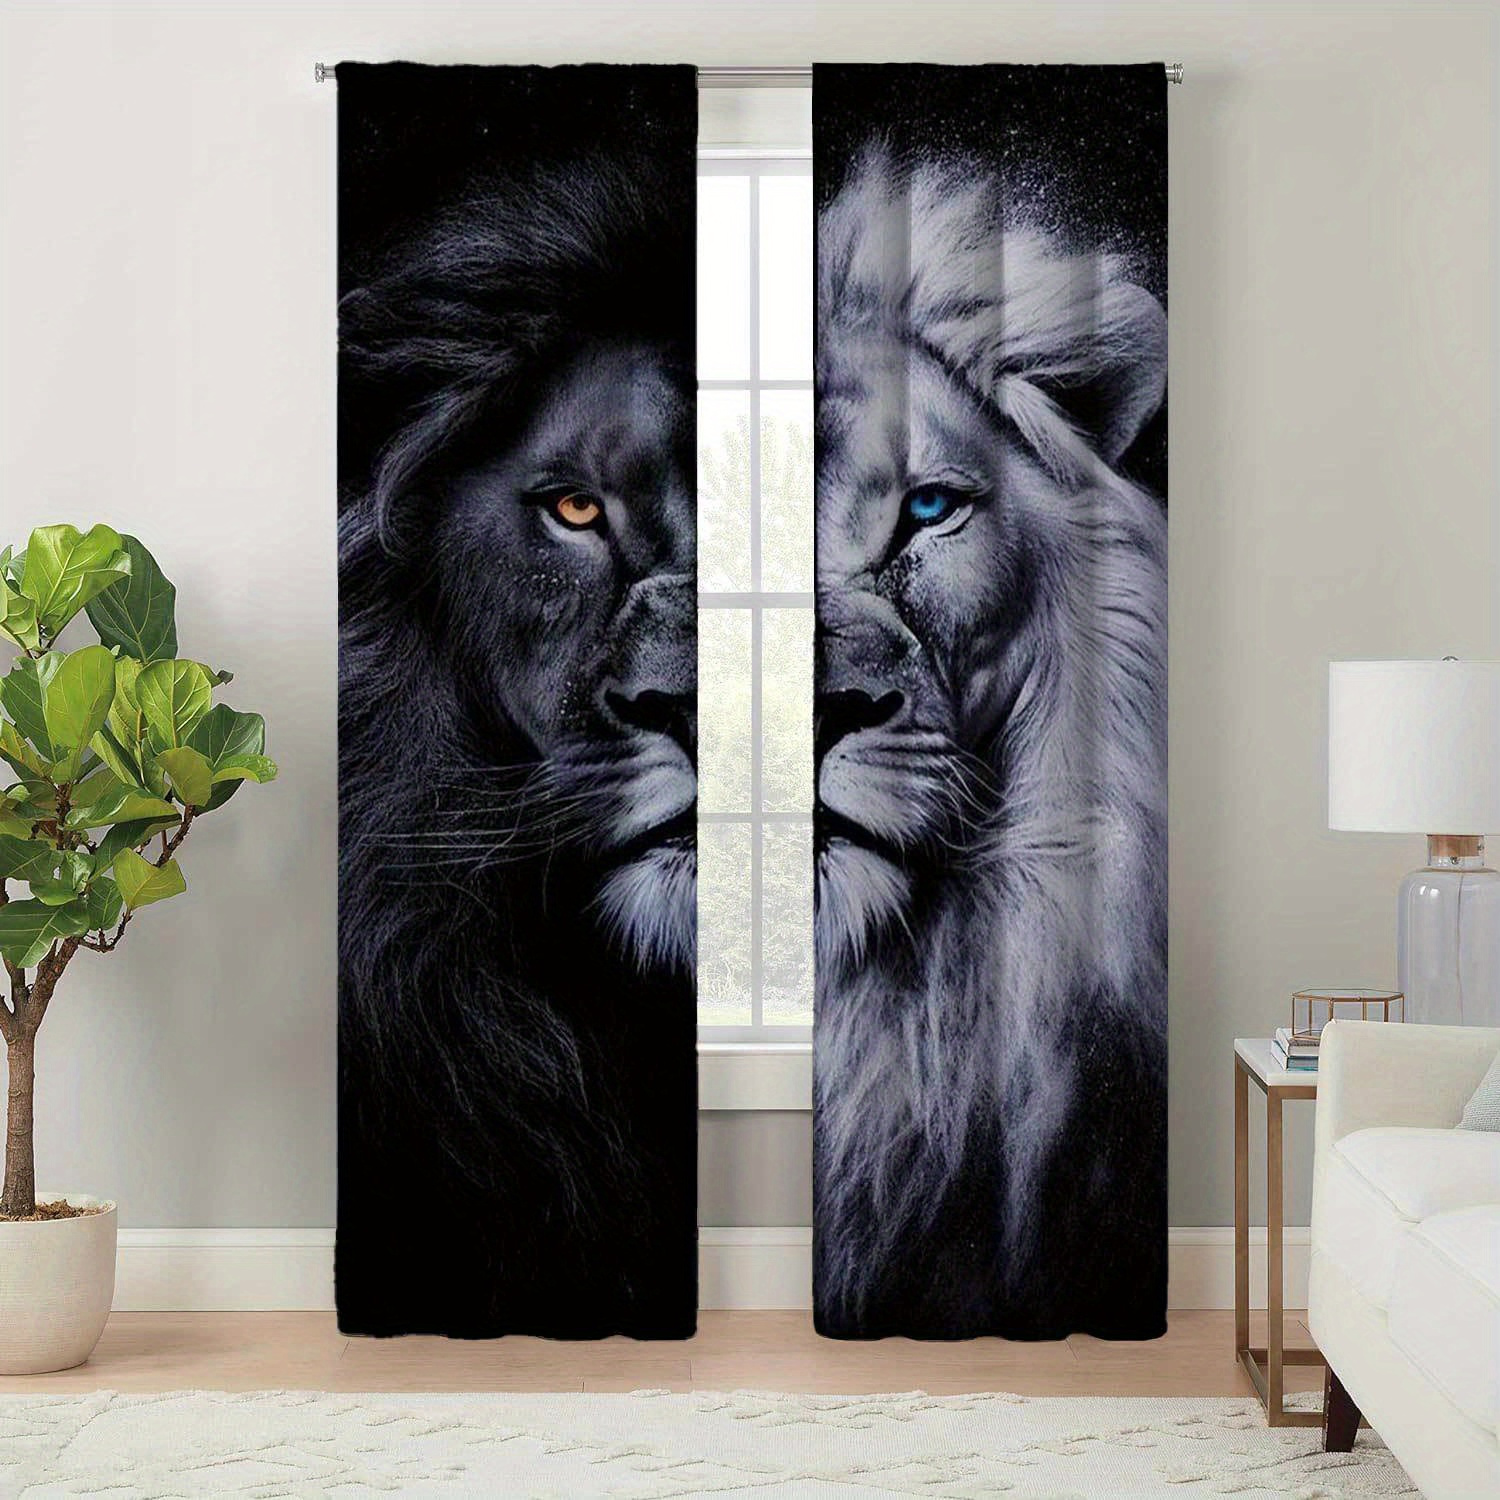 

2pcs, Modern Minimalist Style Living Room Room Decoration Curtains, African Savannah Lion King Printed Curtains, Easy Maintenance, Seasonal Charm For Living & Bedroom Spaces, Durable And Easy To Hang